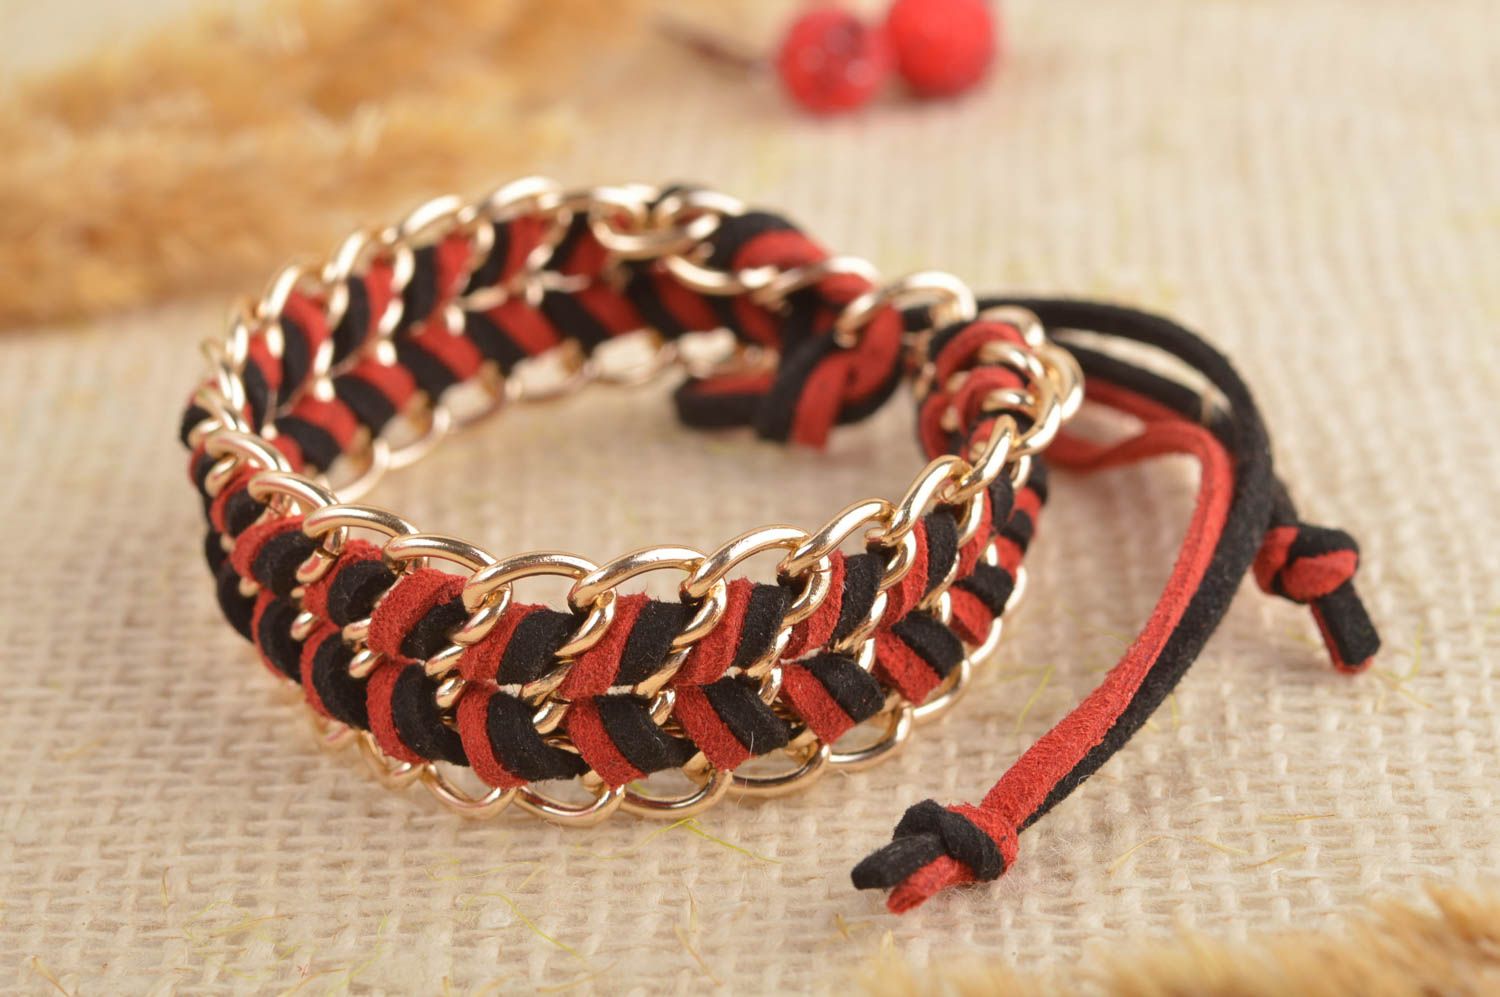 Chain bracelet handmade leather jewelry leather goods fashion accessories photo 1